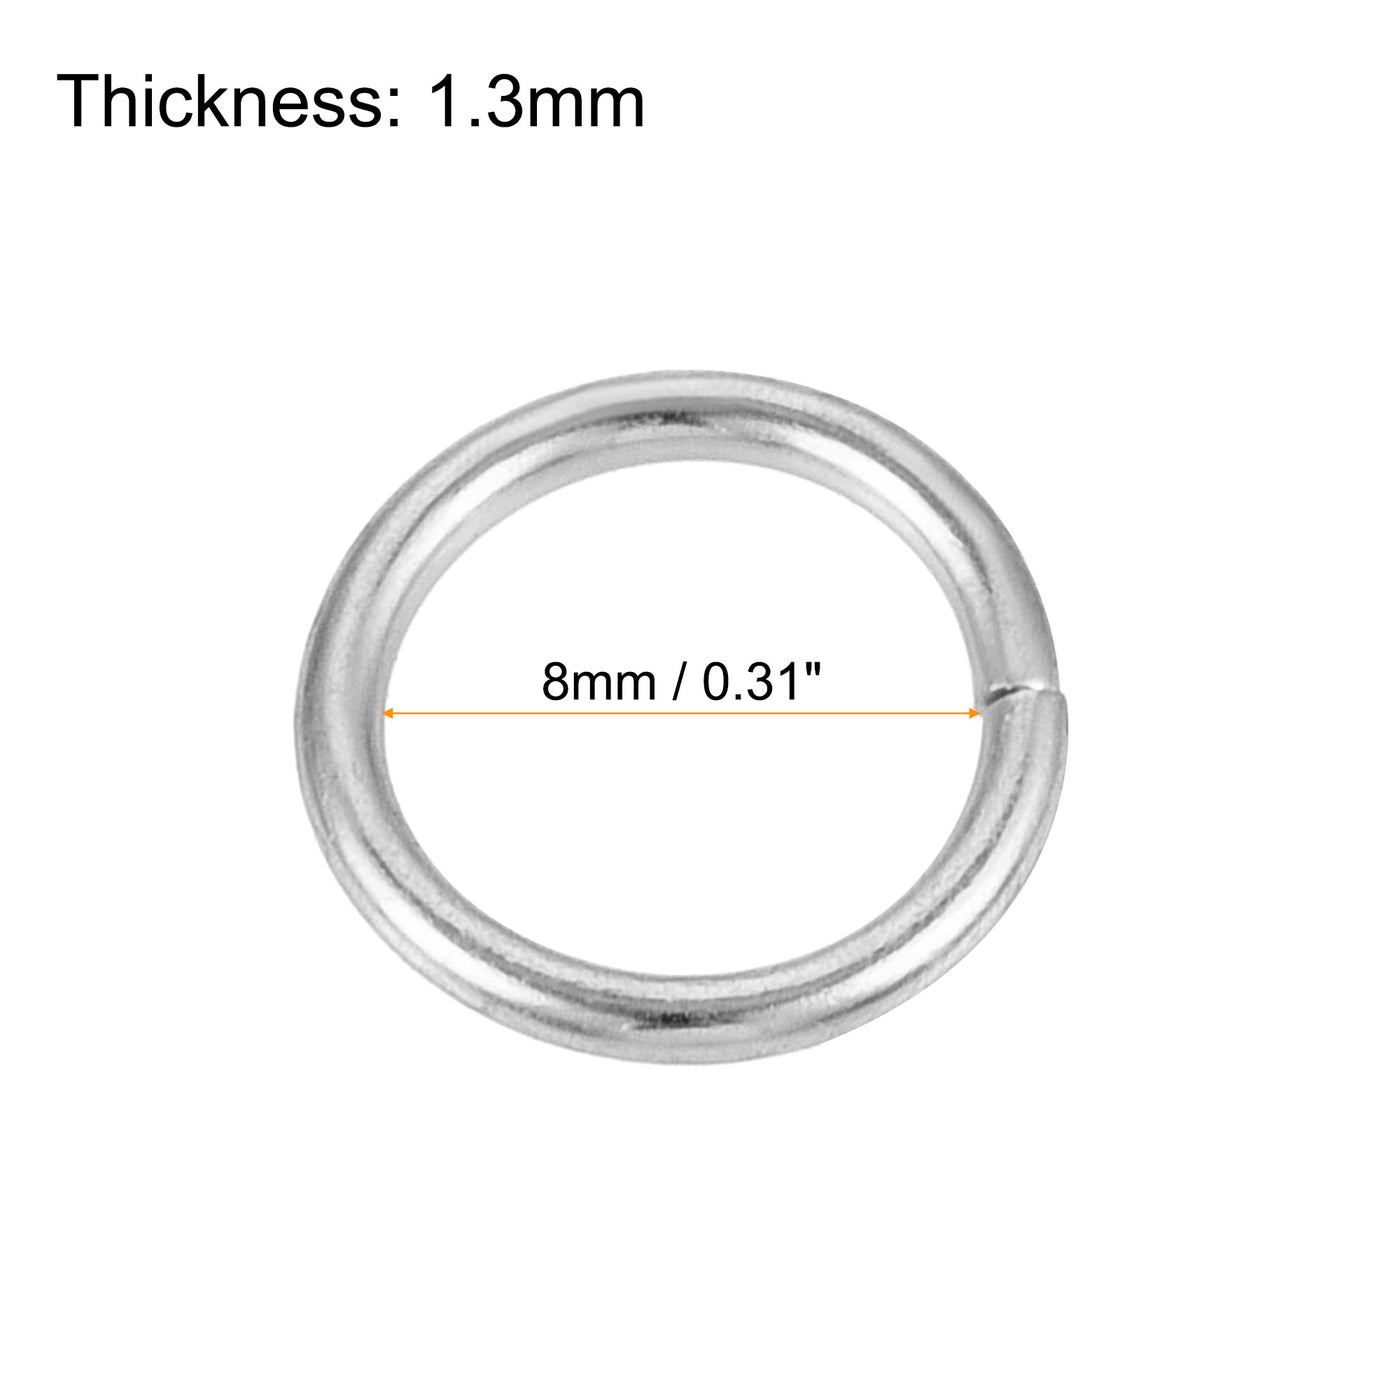 uxcell Uxcell 8mm Metal O Rings Non-Welded for Straps Bags Belts DIY Silver Tone 50pcs